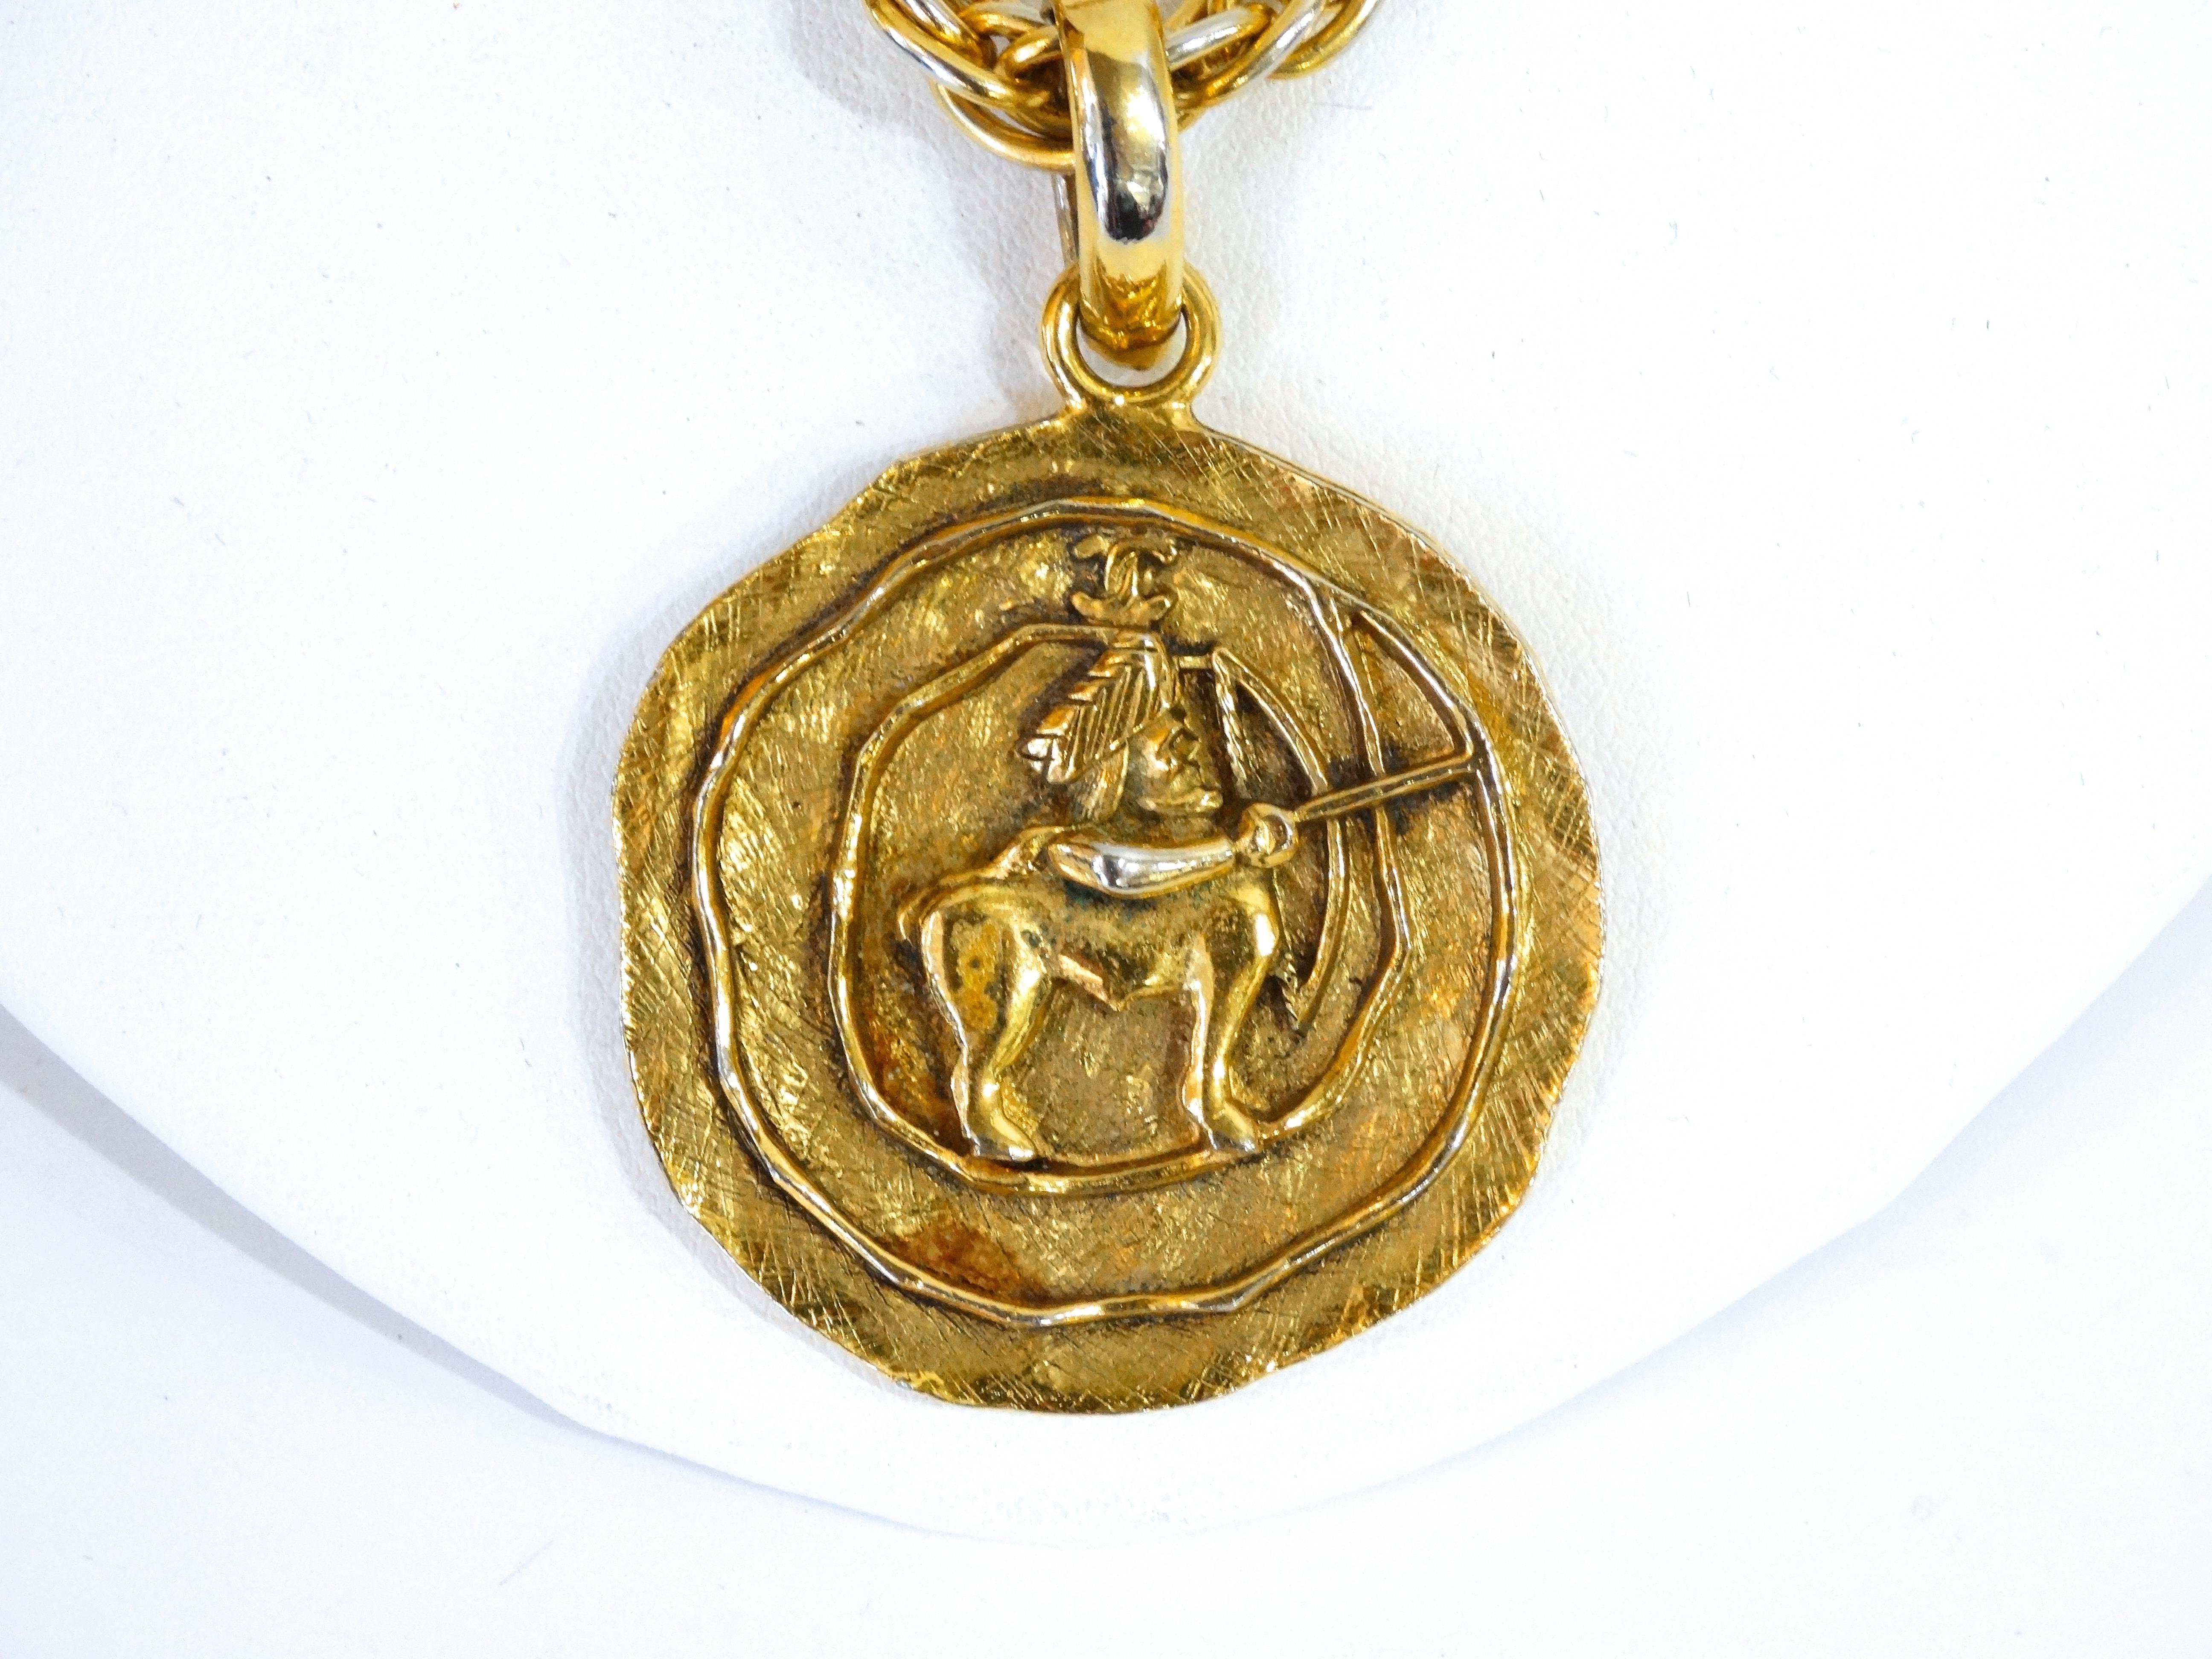 Calling all Sagittarius queens! Accessorize in style with our vintage Chanel medallion from the 1980s. Twisted rope gold chain with intricate medallion depicting Sagittarius motifs. Shown here doubled up, though it can be worn however you like!